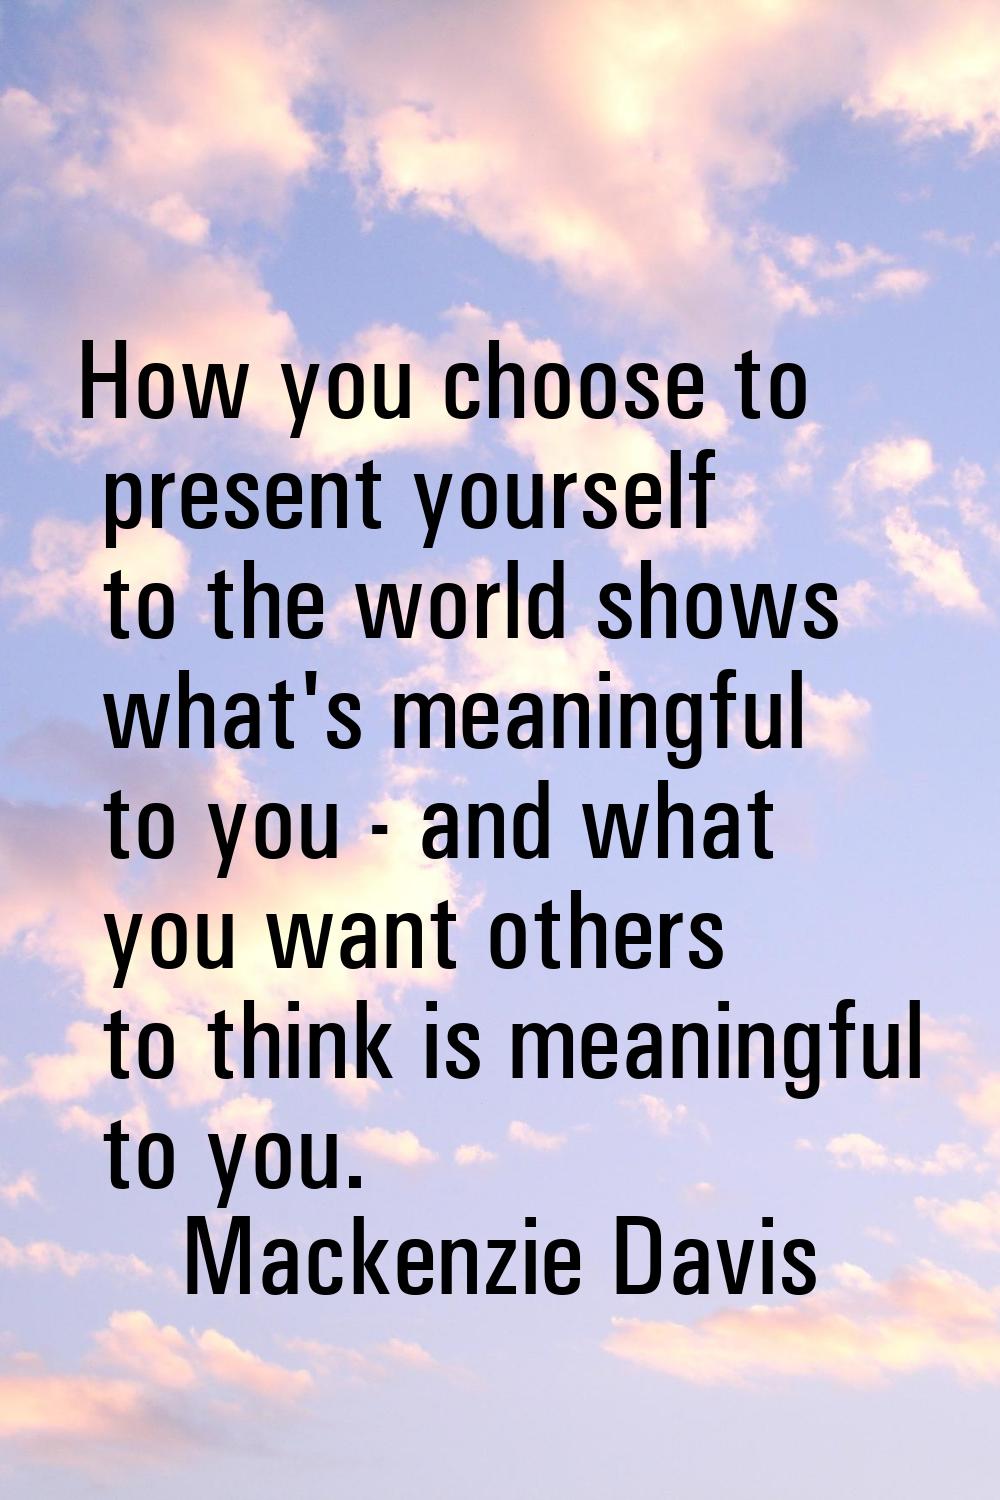 How you choose to present yourself to the world shows what's meaningful to you - and what you want 